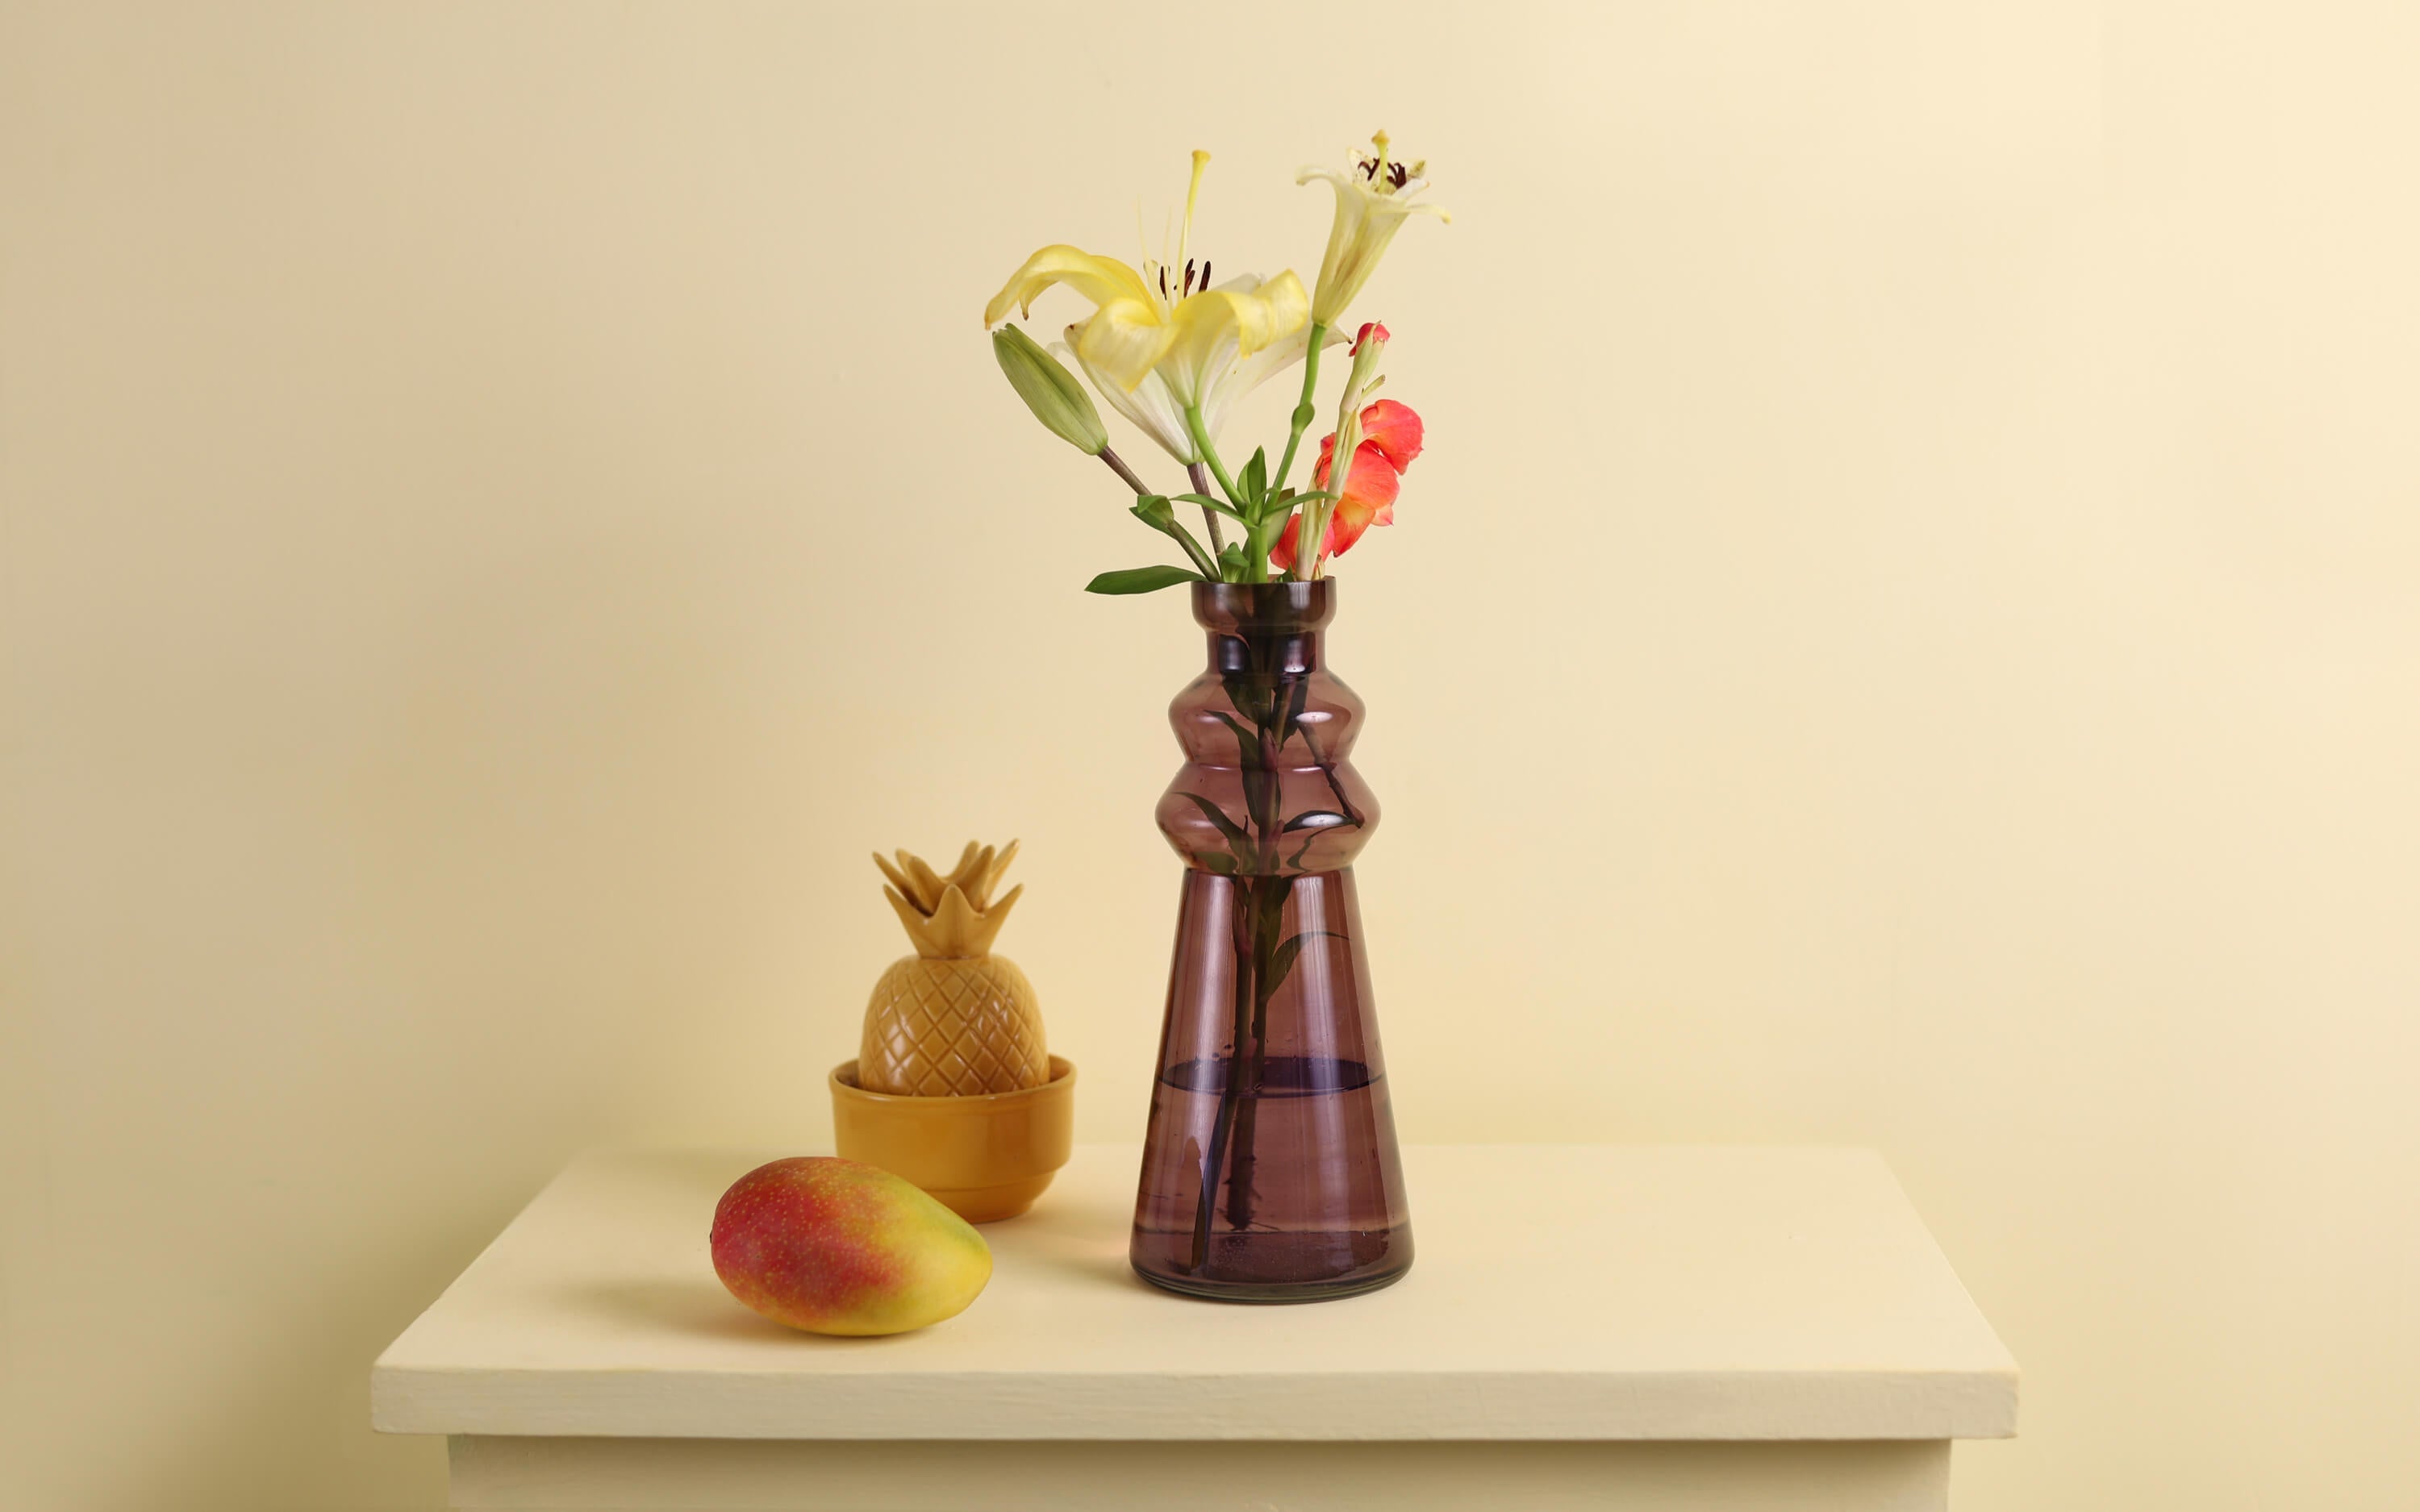 Aesthetic Vases - Versatile Accents for Every Space